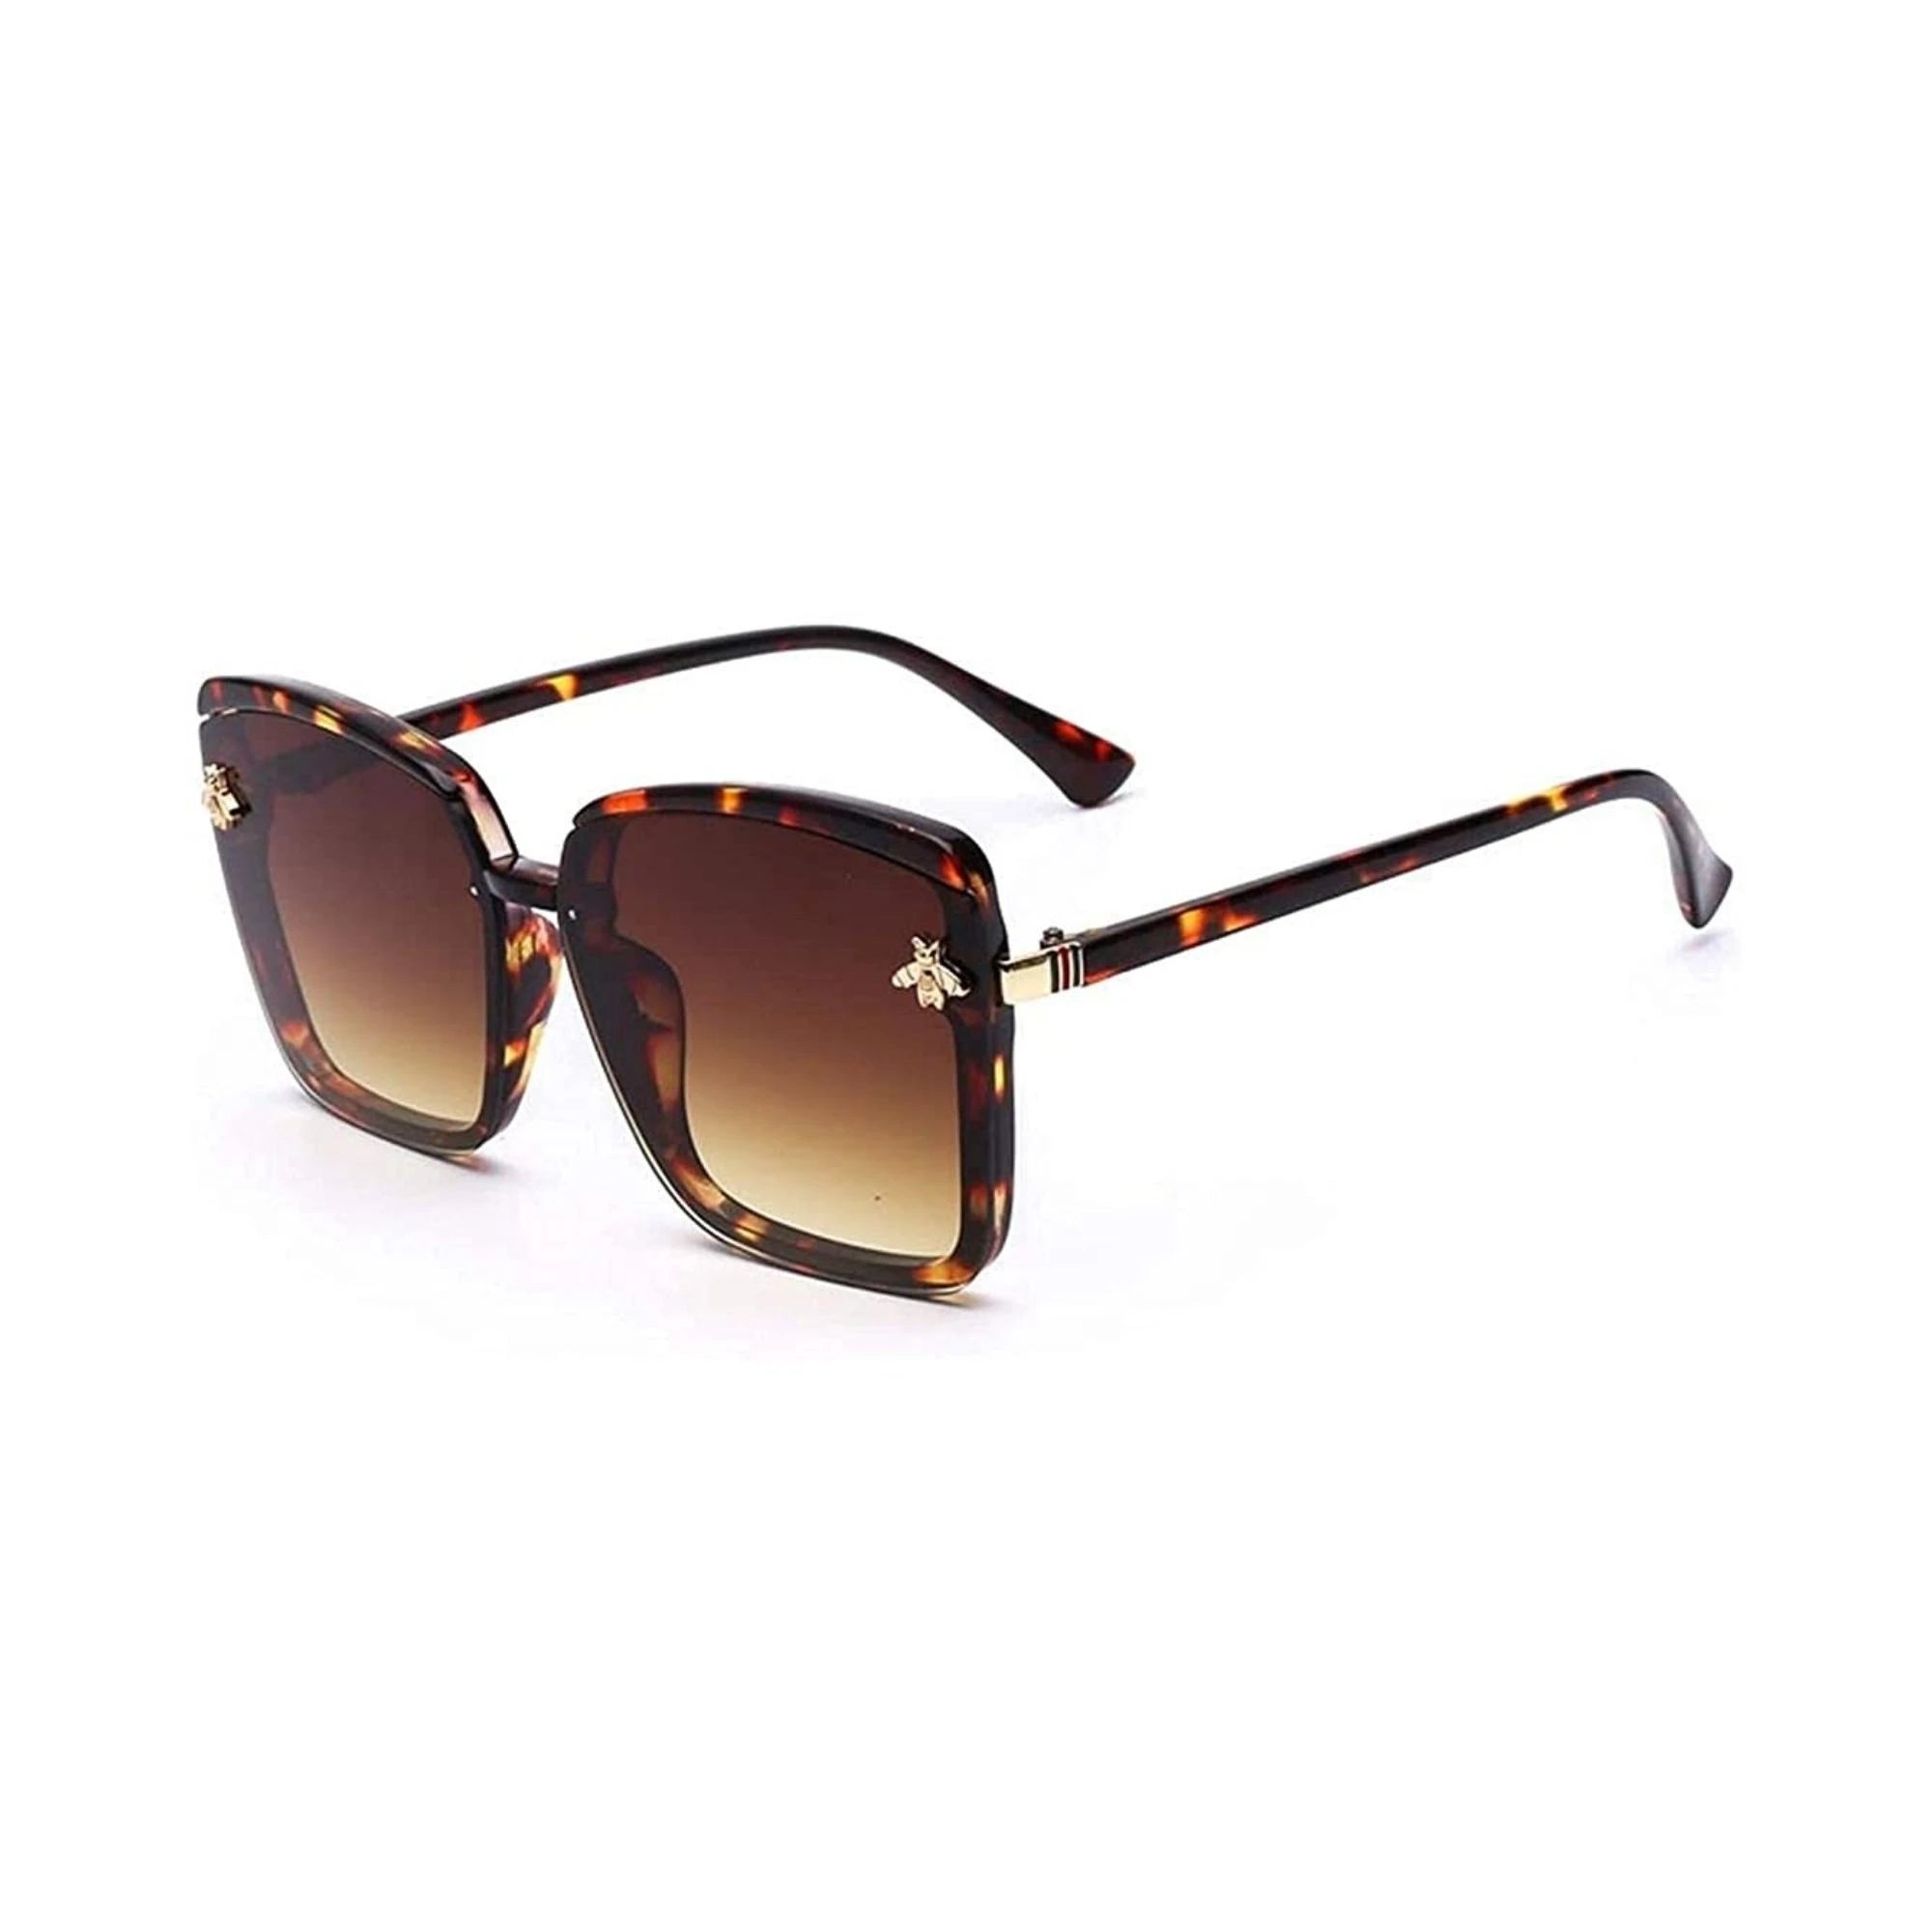 Queen Bee Oversized Square Sunglasses For Women - Leopard Print